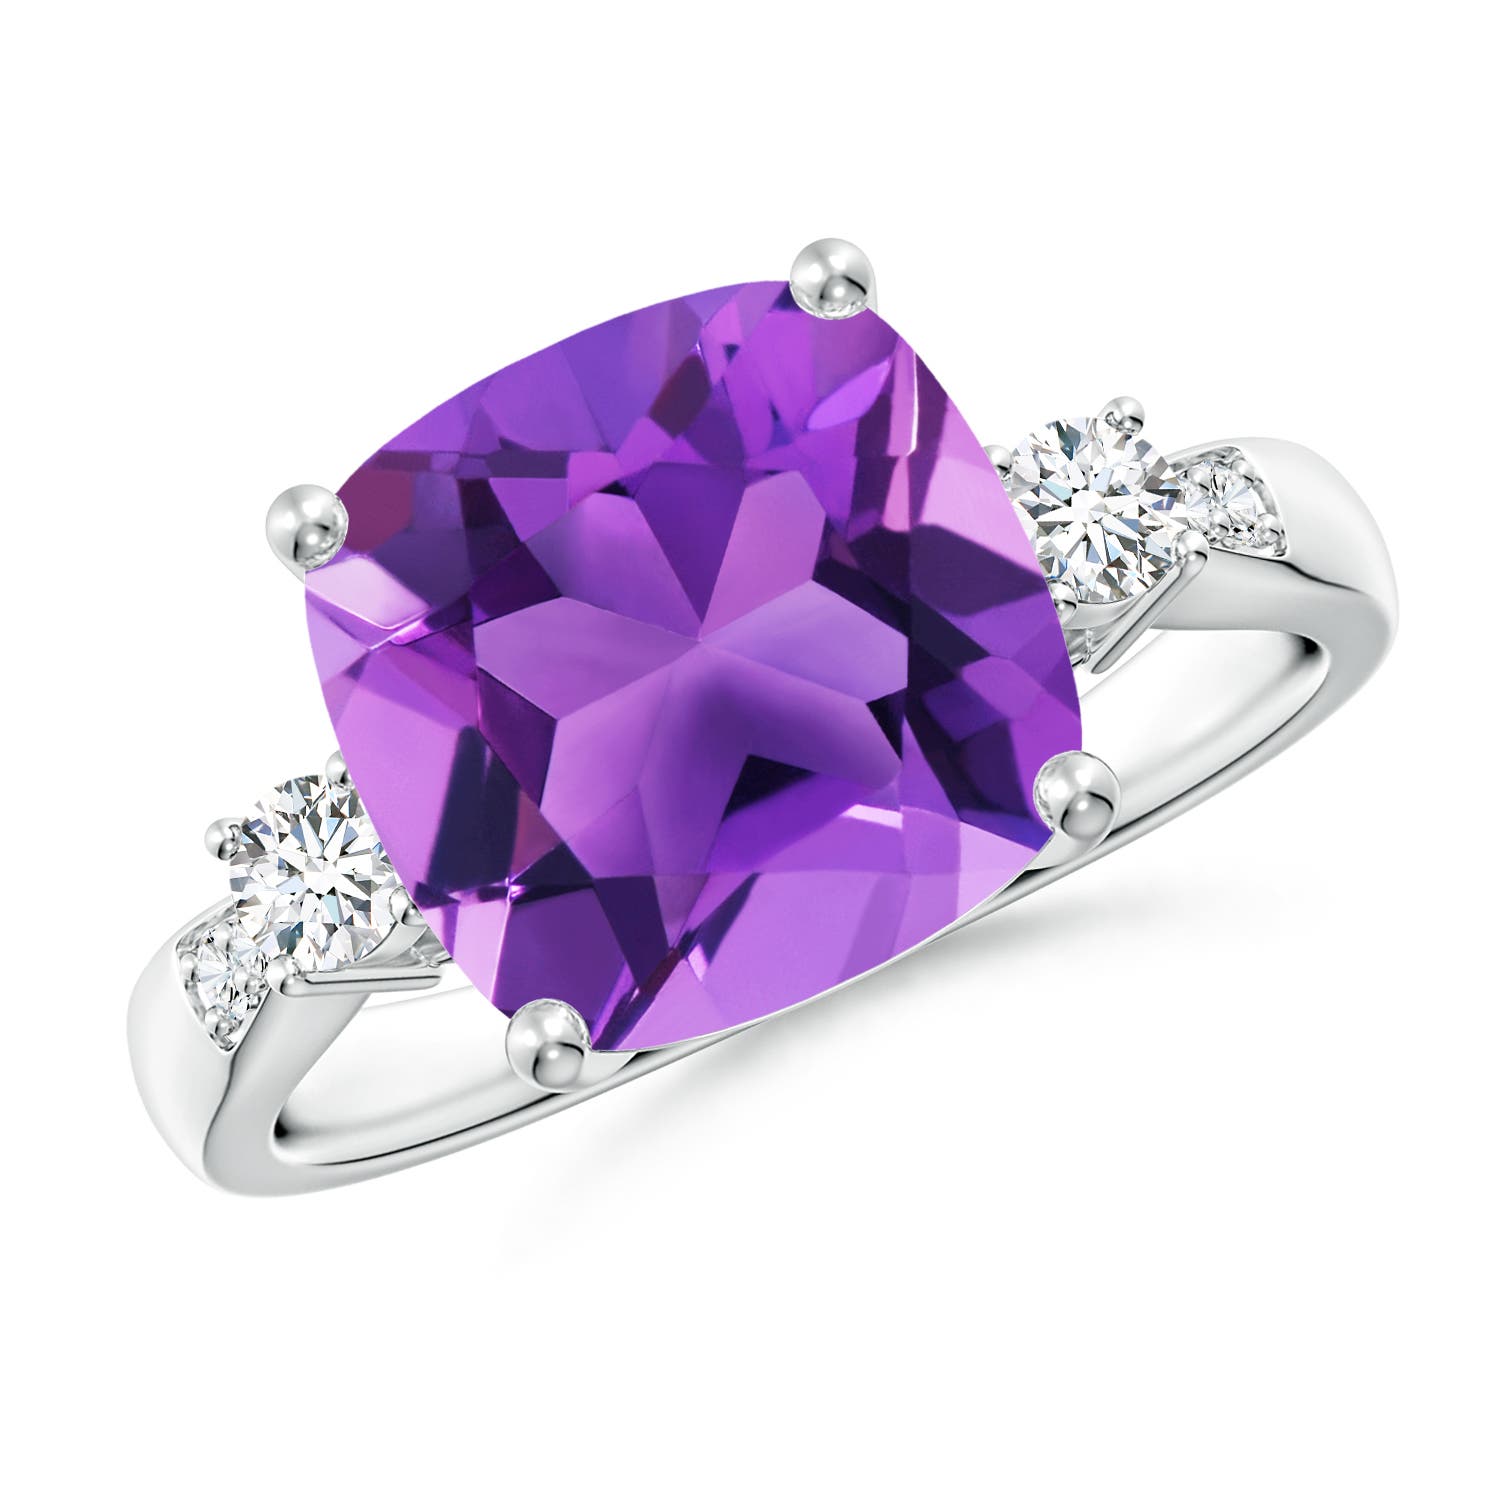 AAA - Amethyst / 3.85 CT / 14 KT White Gold